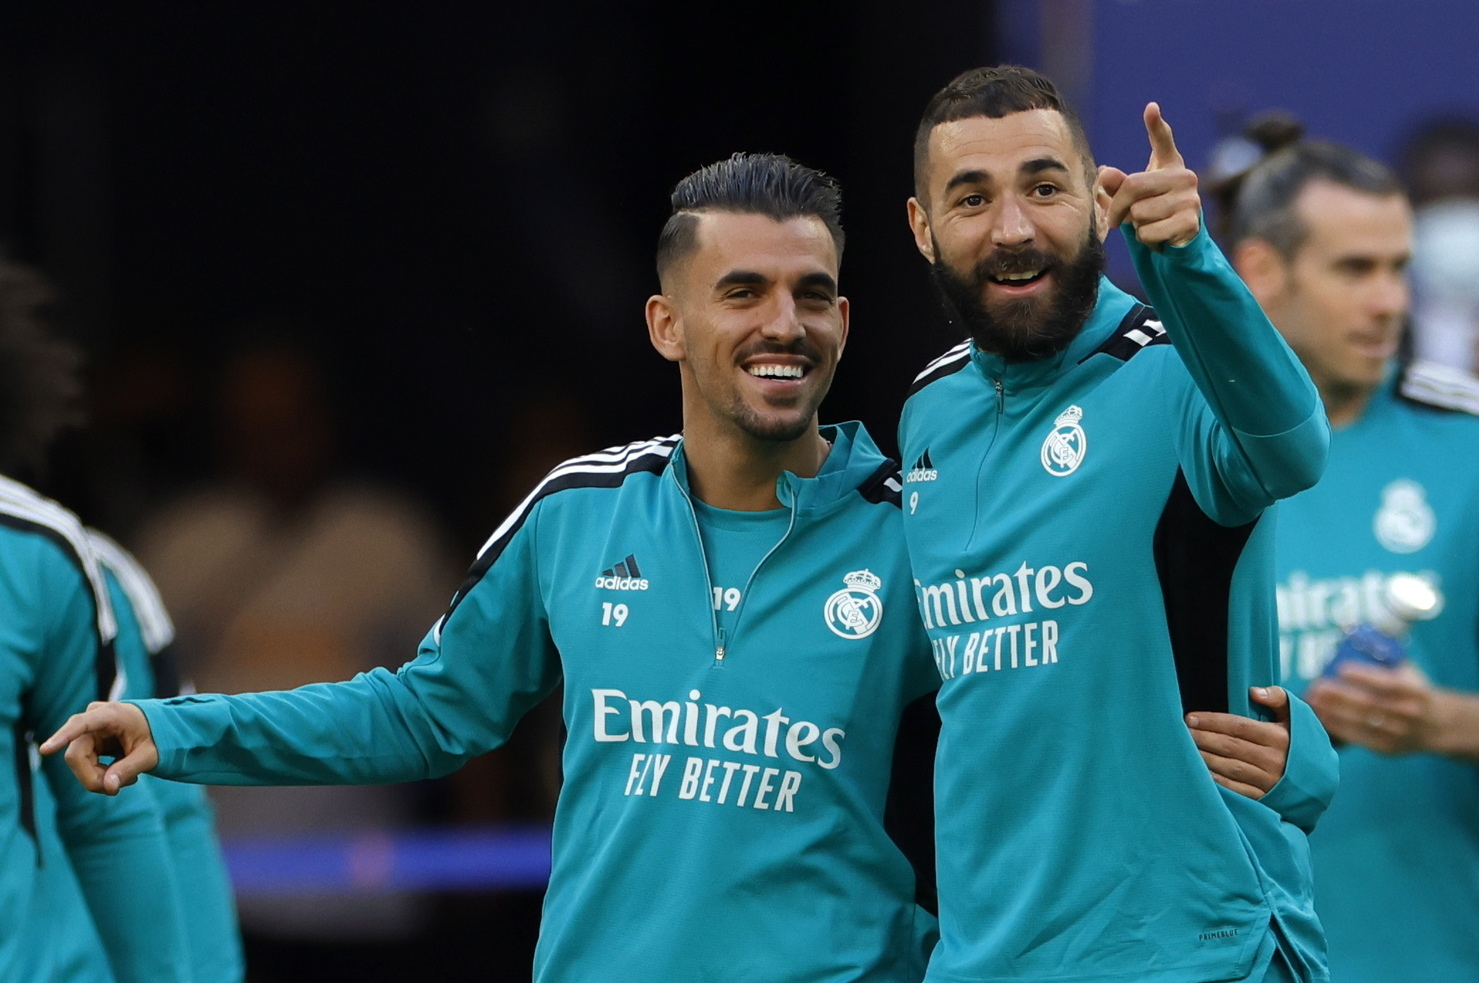 Saint-denis (France), 27/05/2022.- Dani Ceballos (L) and Karim  lt;HIT gt;Benzema lt;/HIT gt; of Real Madrid attend the team's training session at Stade de France in Saint-Denis, near Paris, France, 27 May 2022. Real Madrid will face Liverpool FC in their UEFA Champions League final on 28 May 2022. (Liga de Campeones, Francia) EFE/EPA/YOAN VALAT